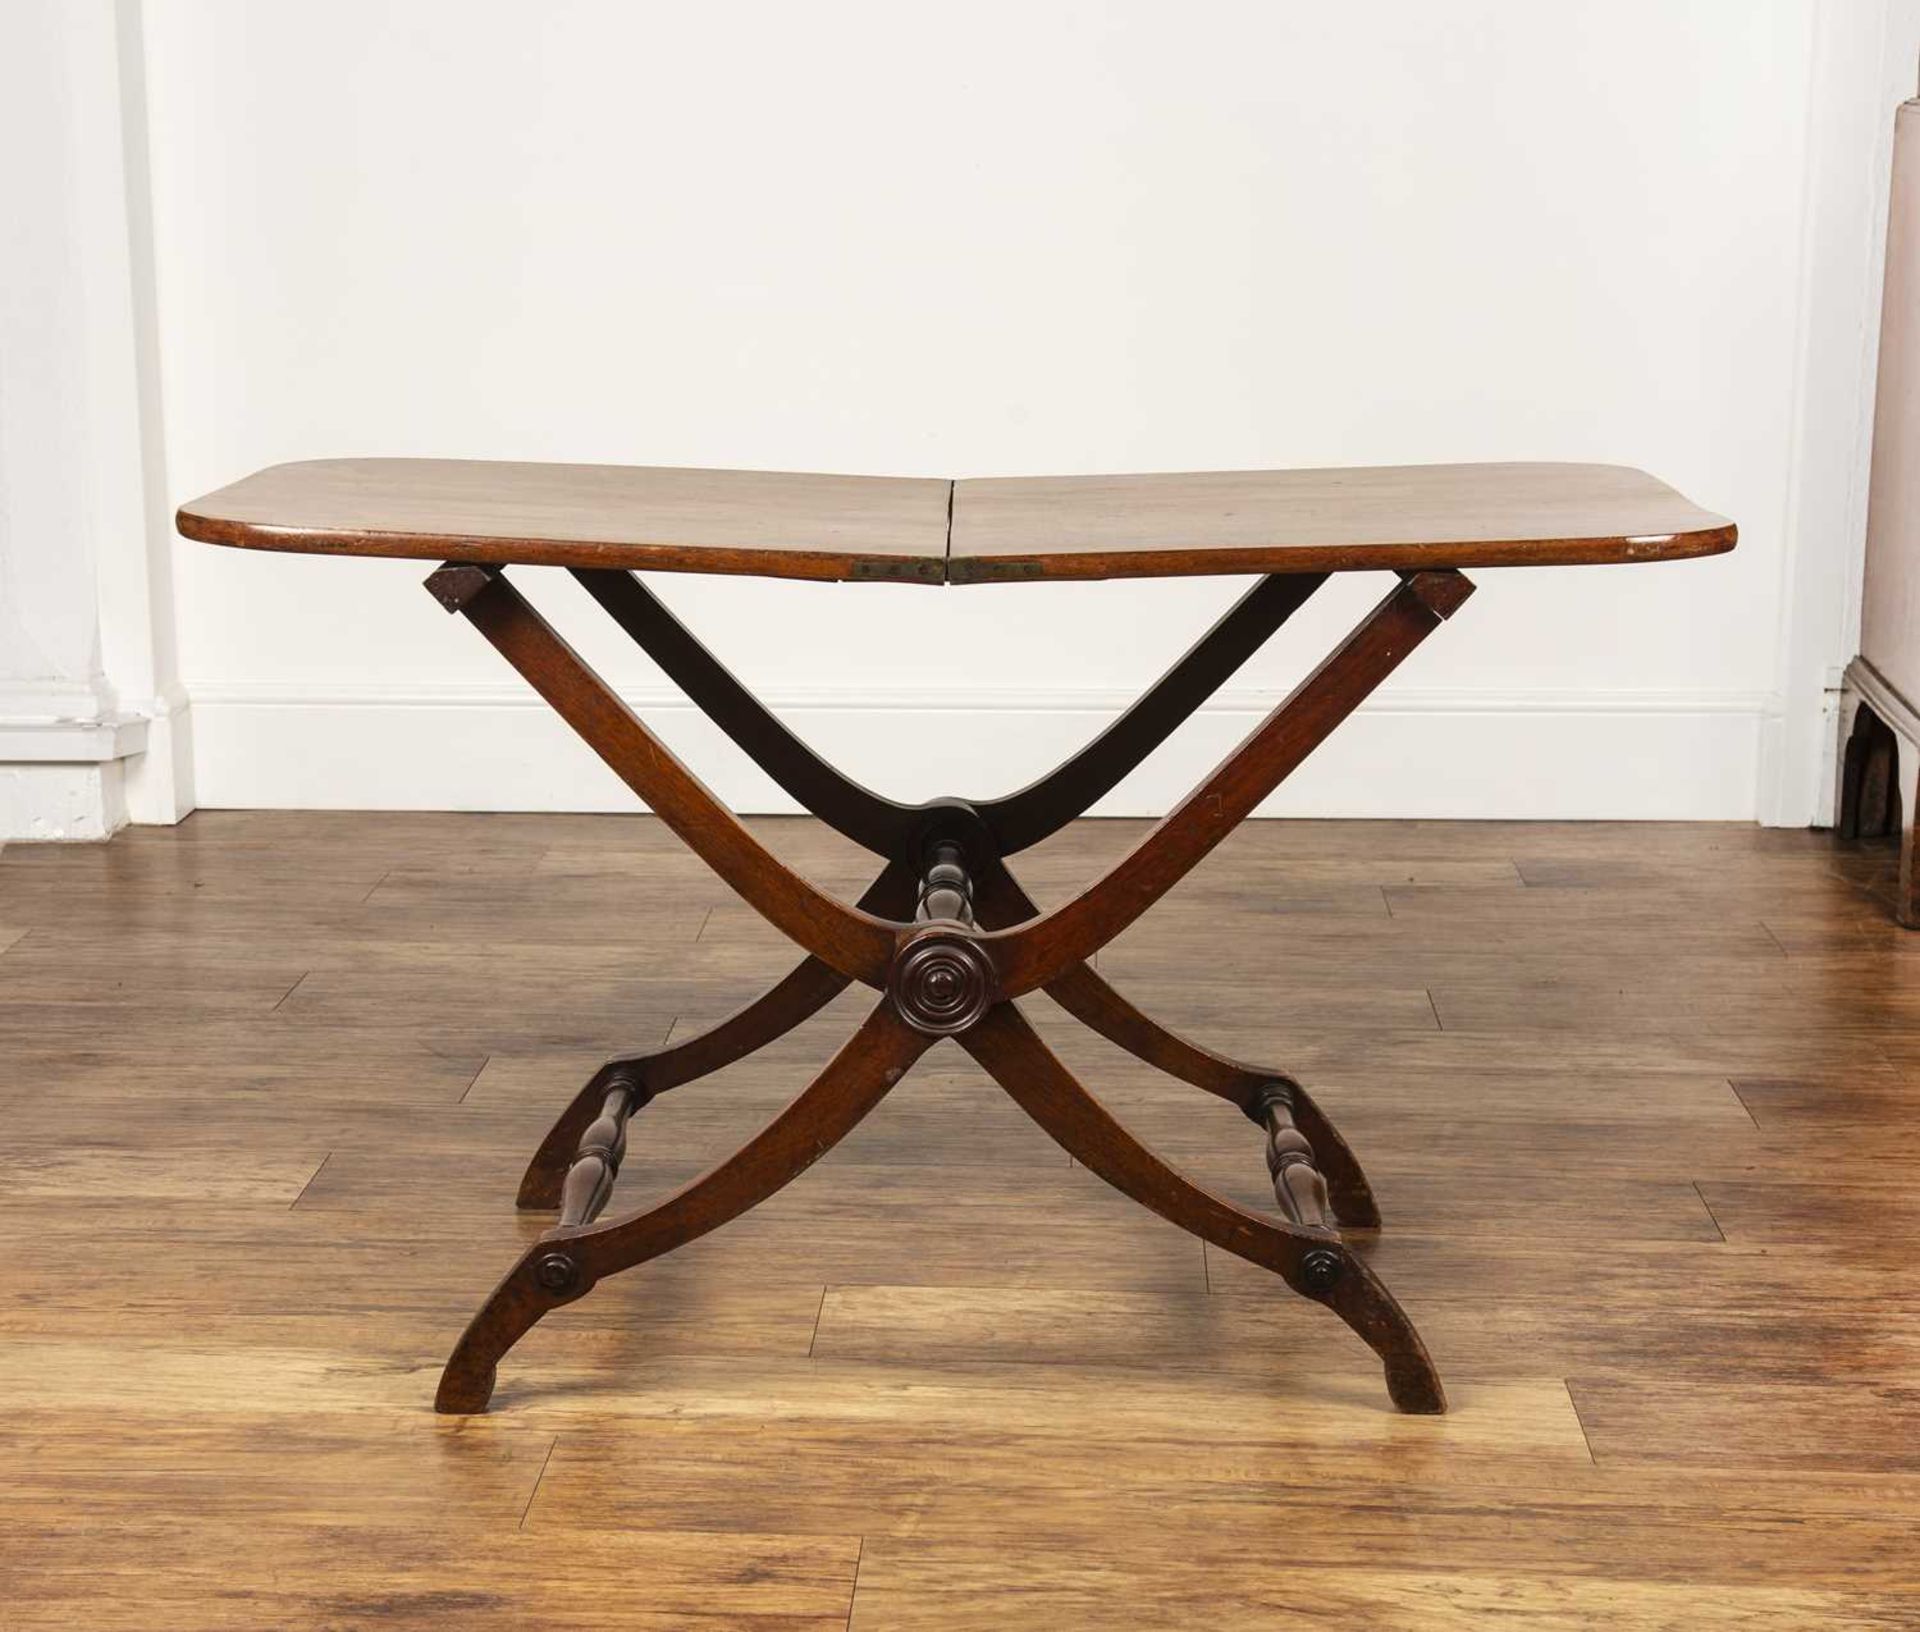 Mahogany folding coaching or campaign table 19th Century, on 'x' stretcher, 111cm wide x 64.5cm high